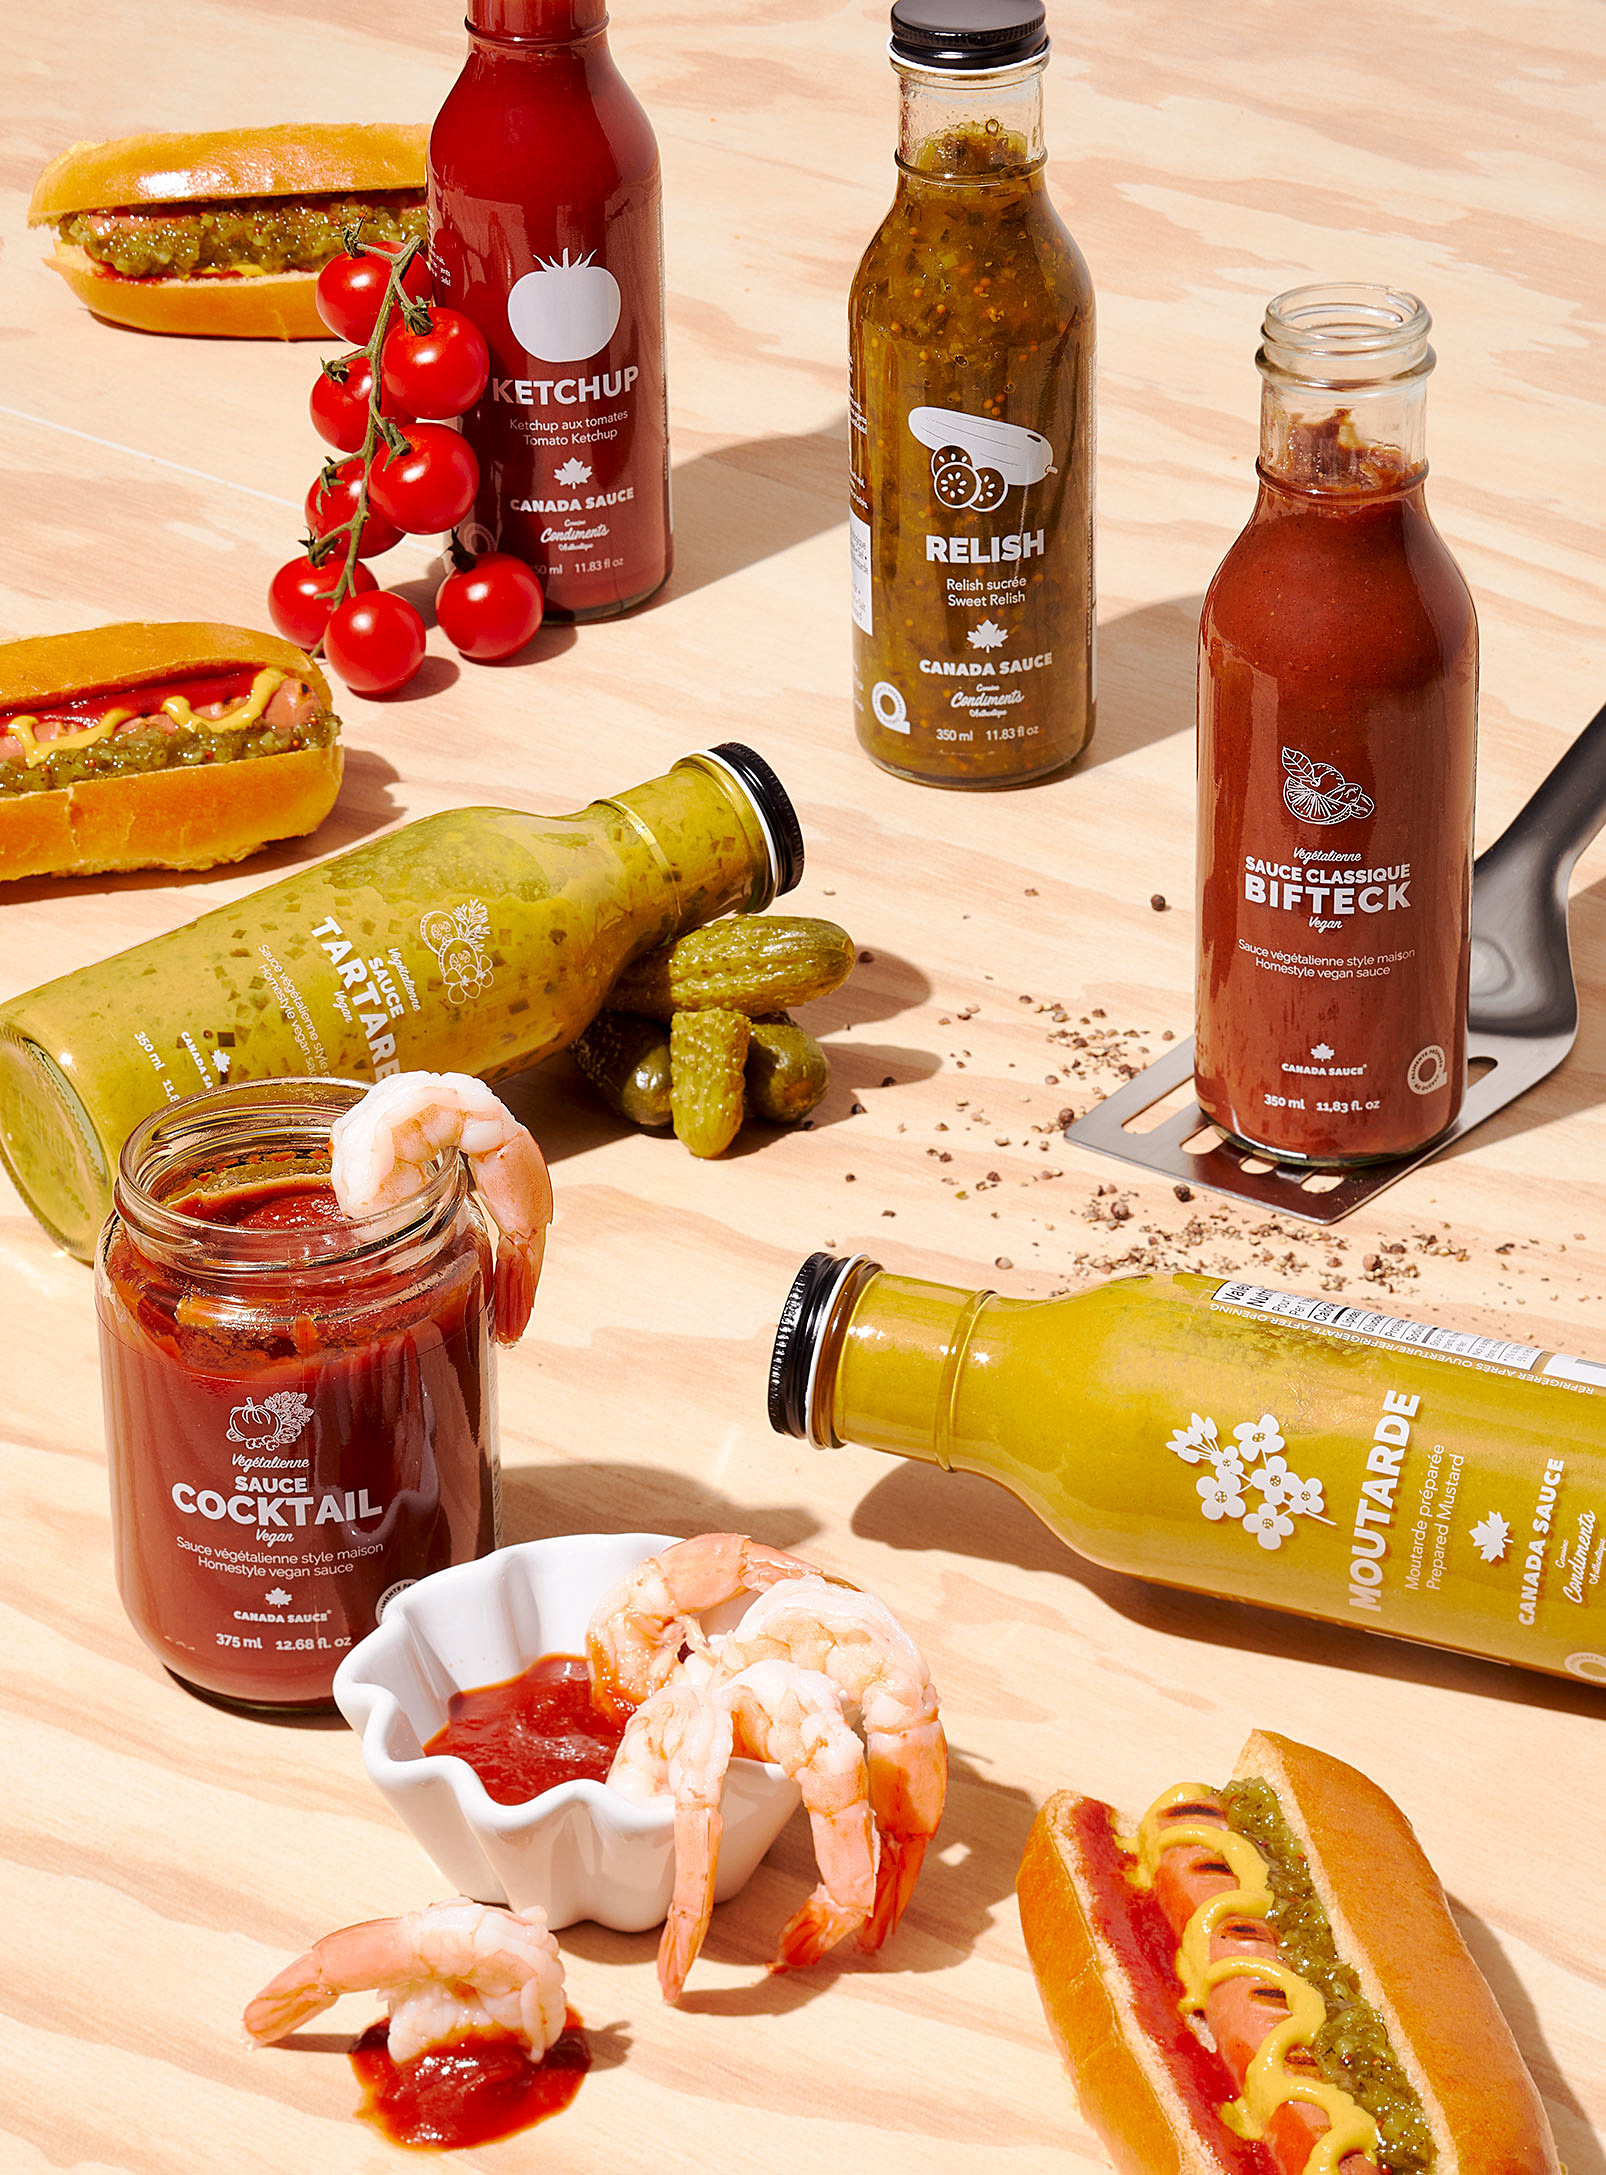 Canada Sauce - Canada Sauce discovery set 6 products